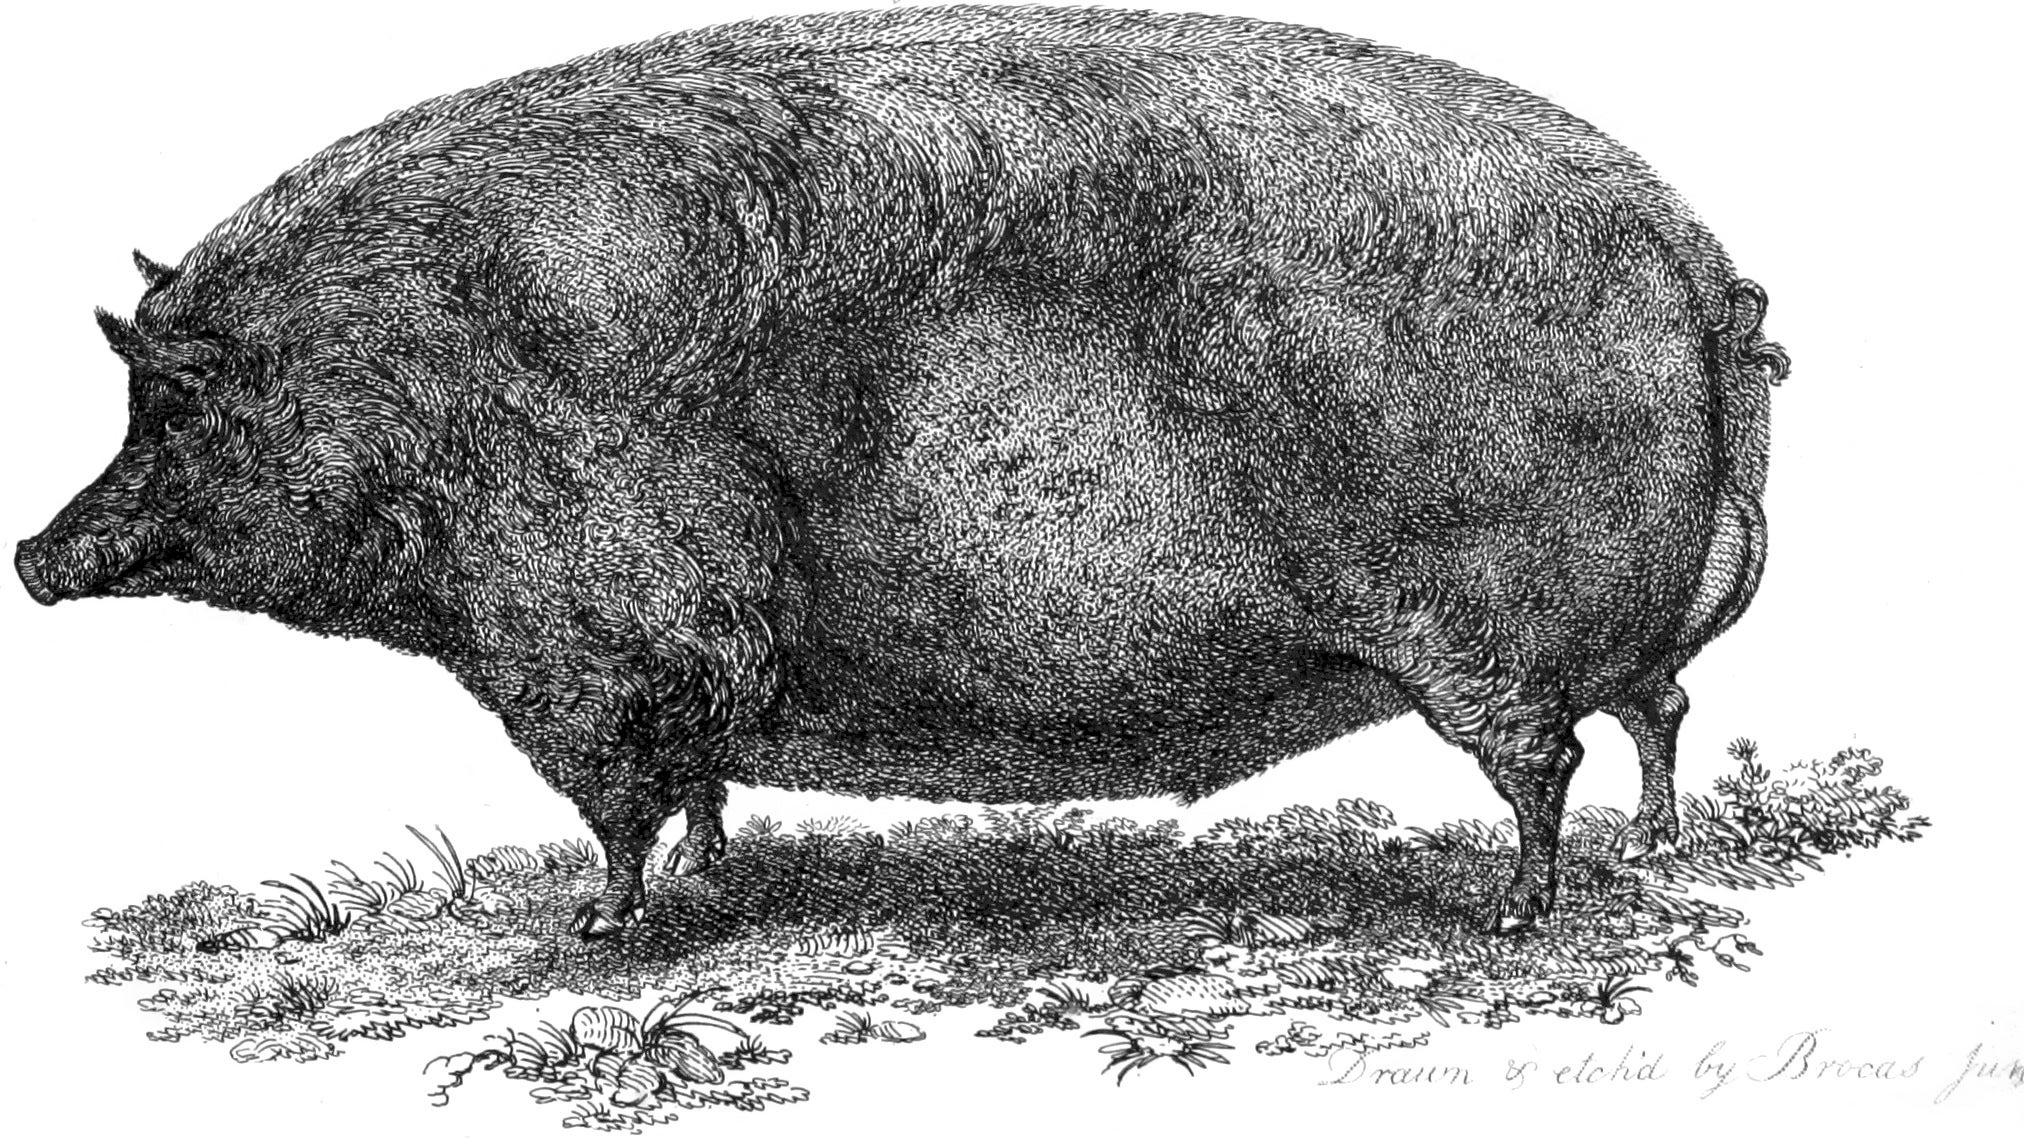 A big pig in an illustration from 'Observations on Mr. Archer's statistical survey of the County of Dublin'.